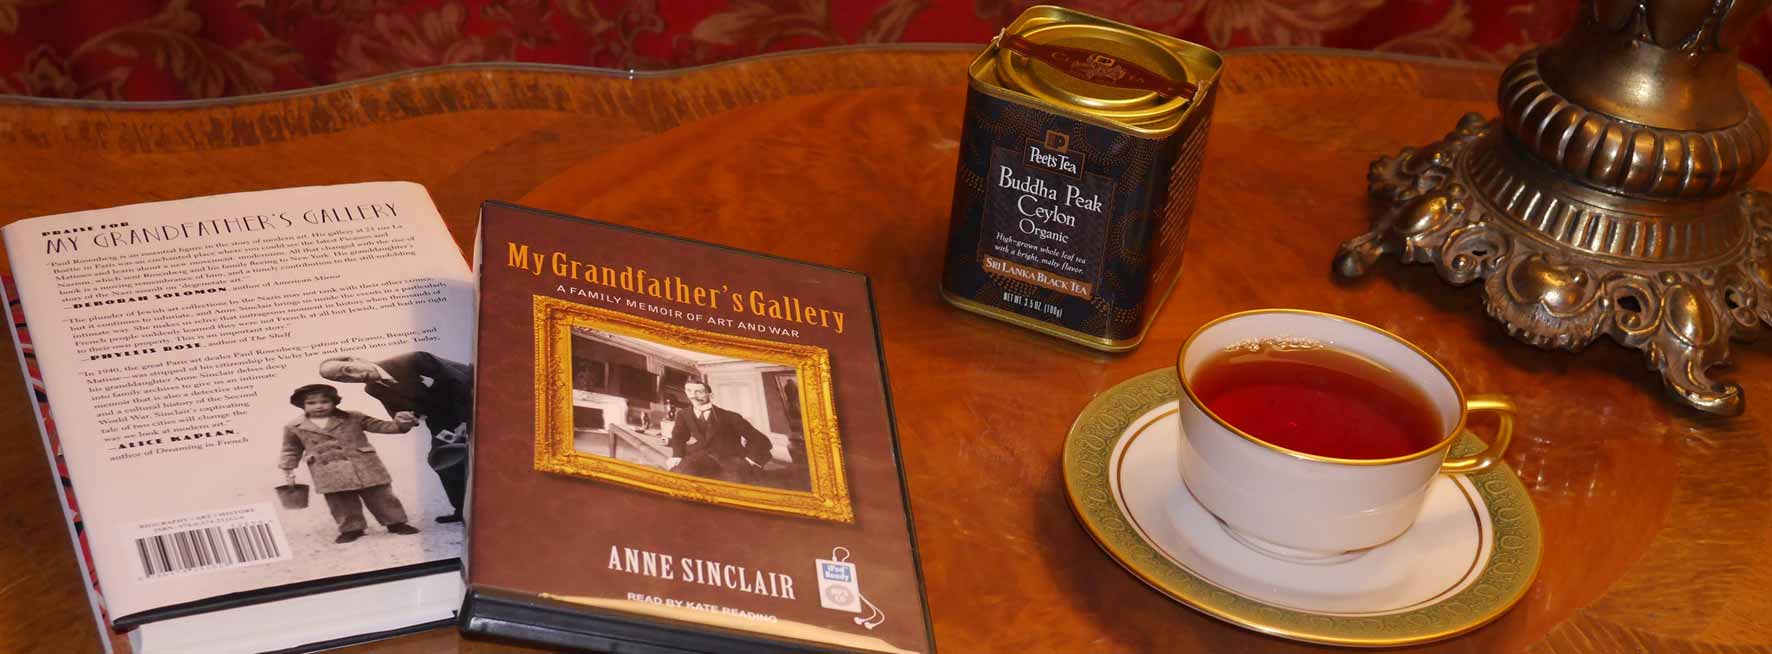 Print and audiobook editions of My Grandfather's Gallery by Anne Sinclair, and Buddha's Peak Tea